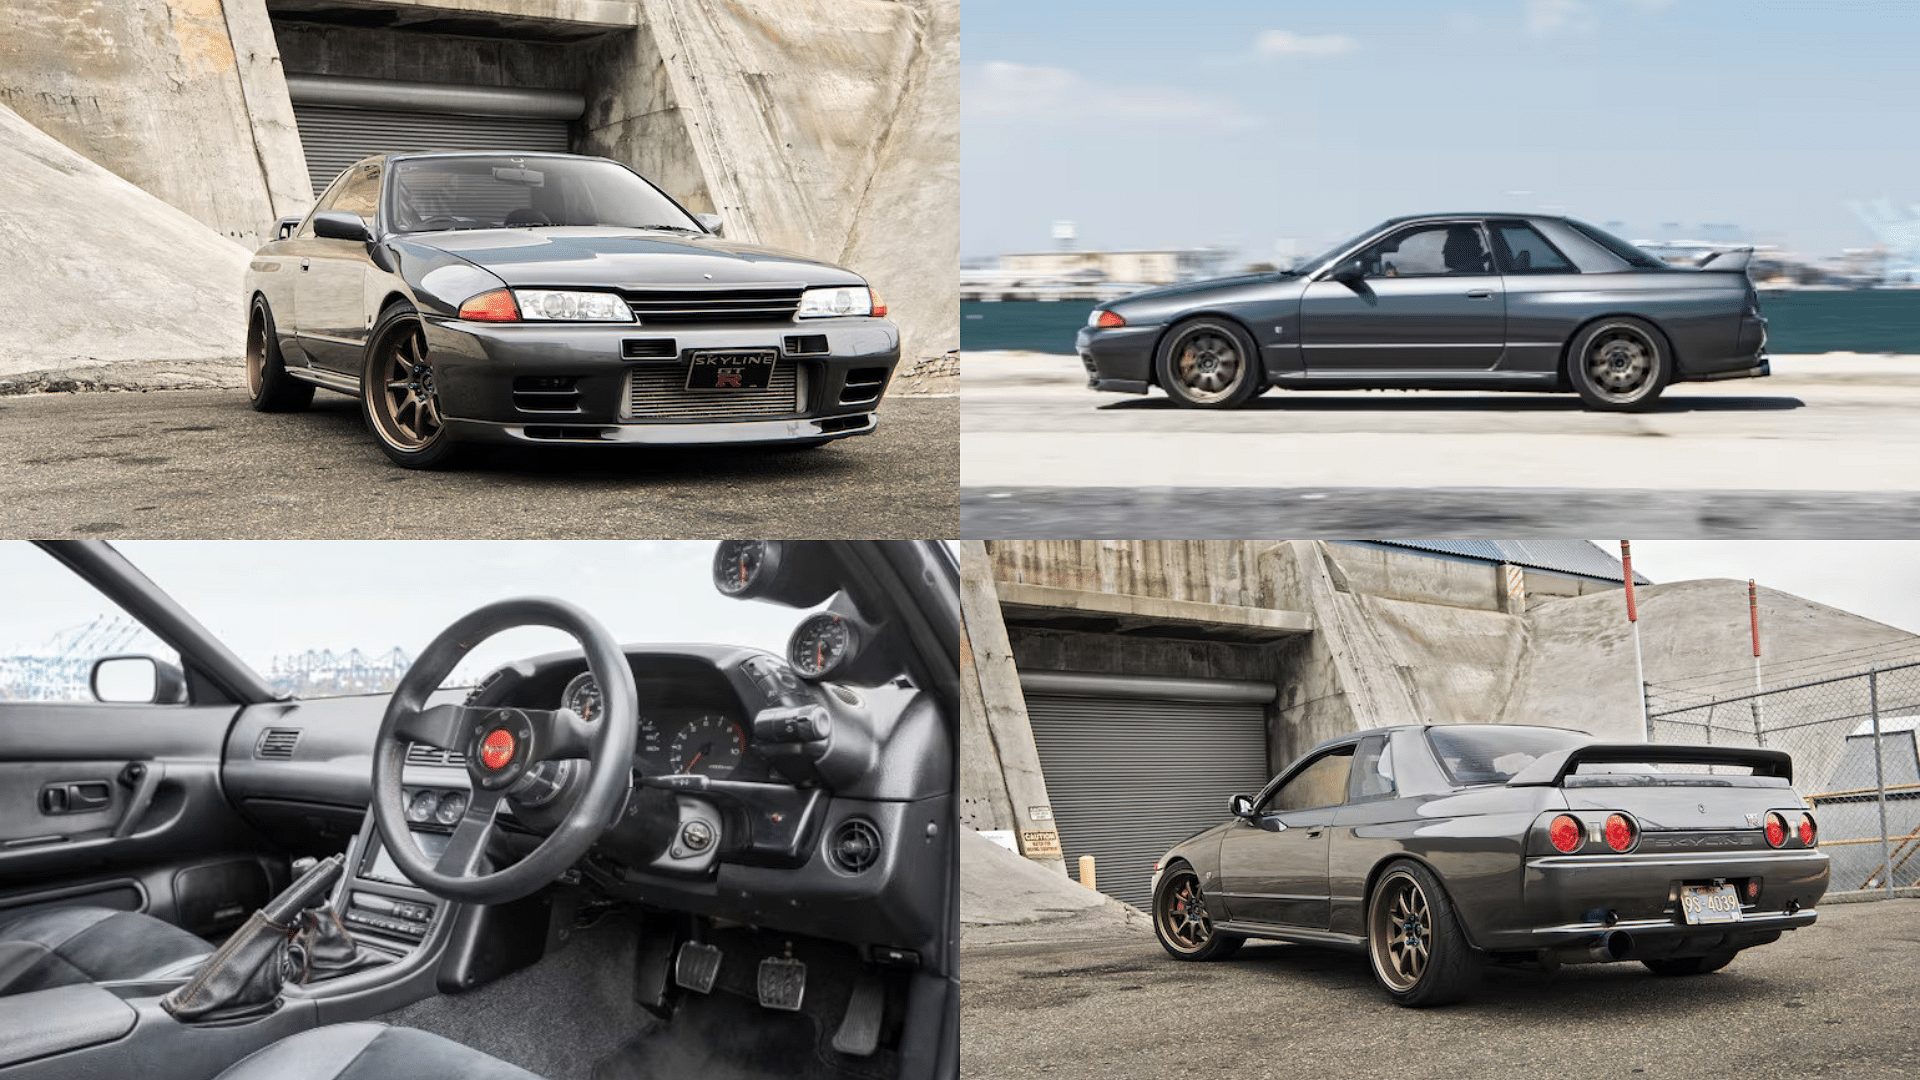 1989 Nissan Skyline R32 GT-R - front view, rear view, side view, dashboard, interior